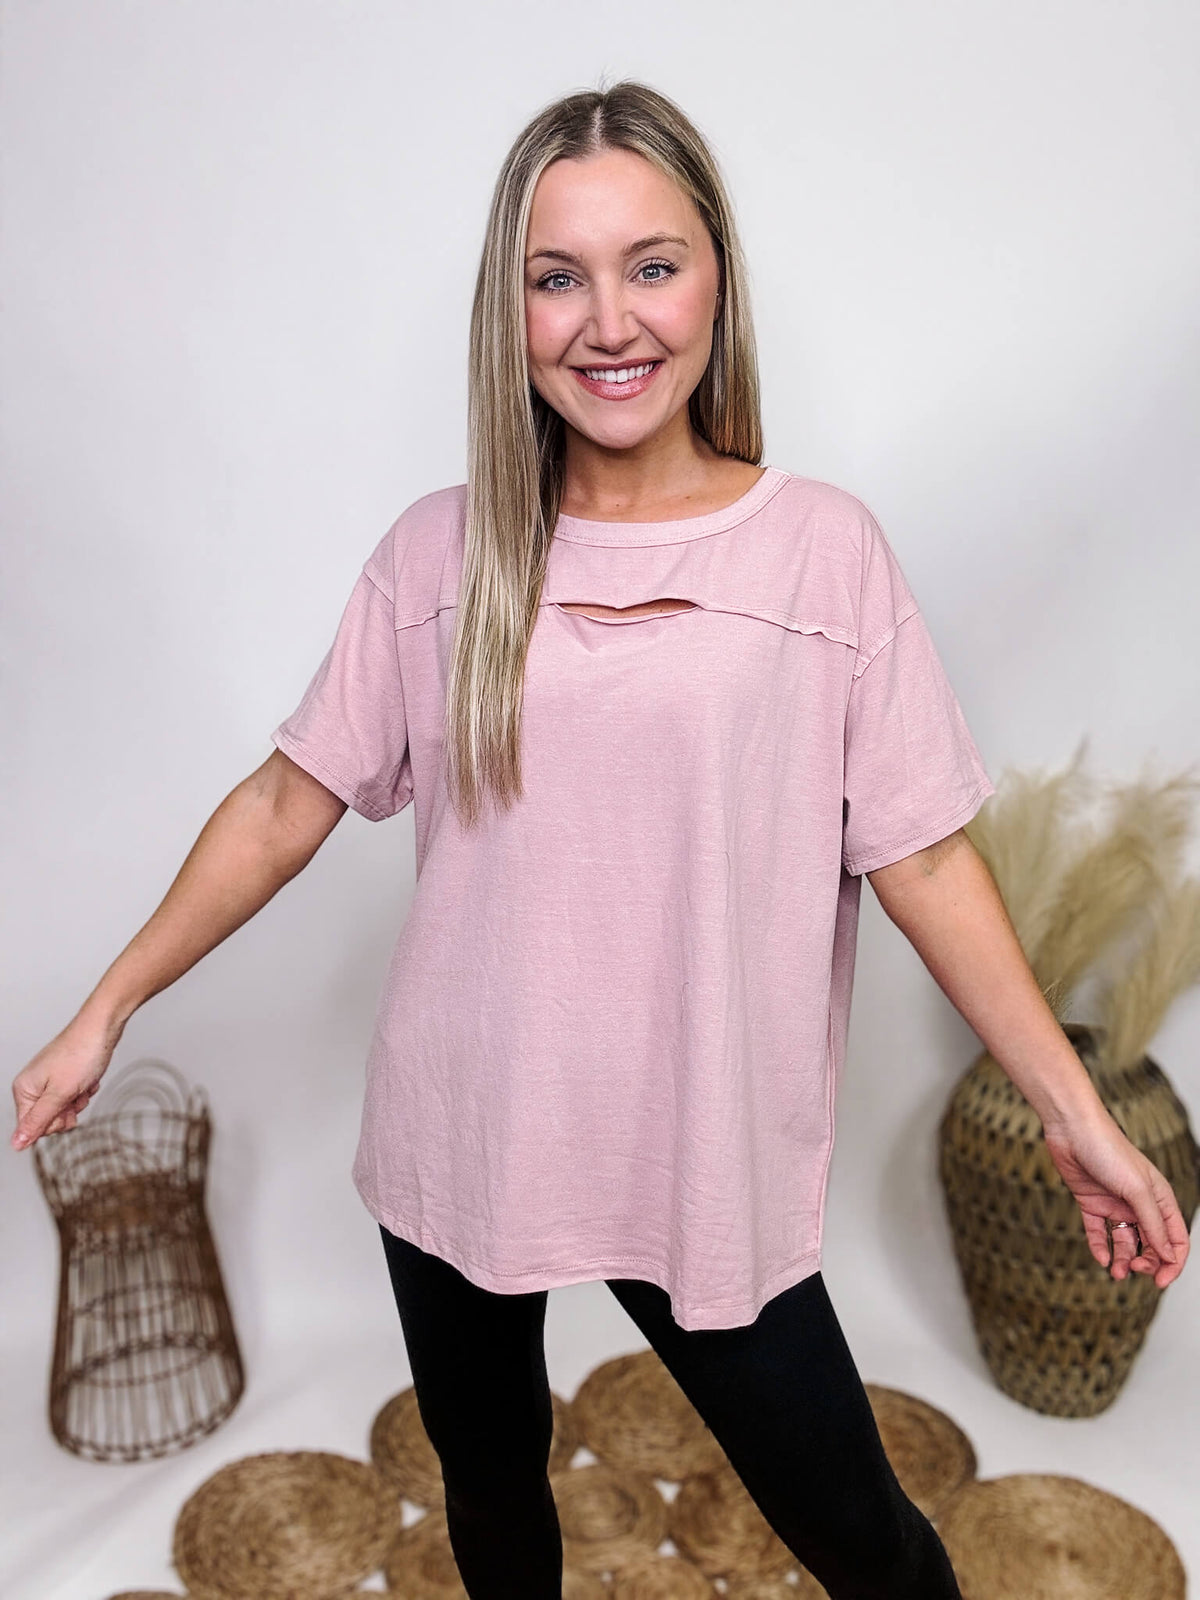 Rae Mode Pink Blush Oversized T-Shirt Cutout Detail at Chest Oversized Fit Mineral Washed 48% Polyester, 37% Cotton, 12% Rayon, 3% Spandex